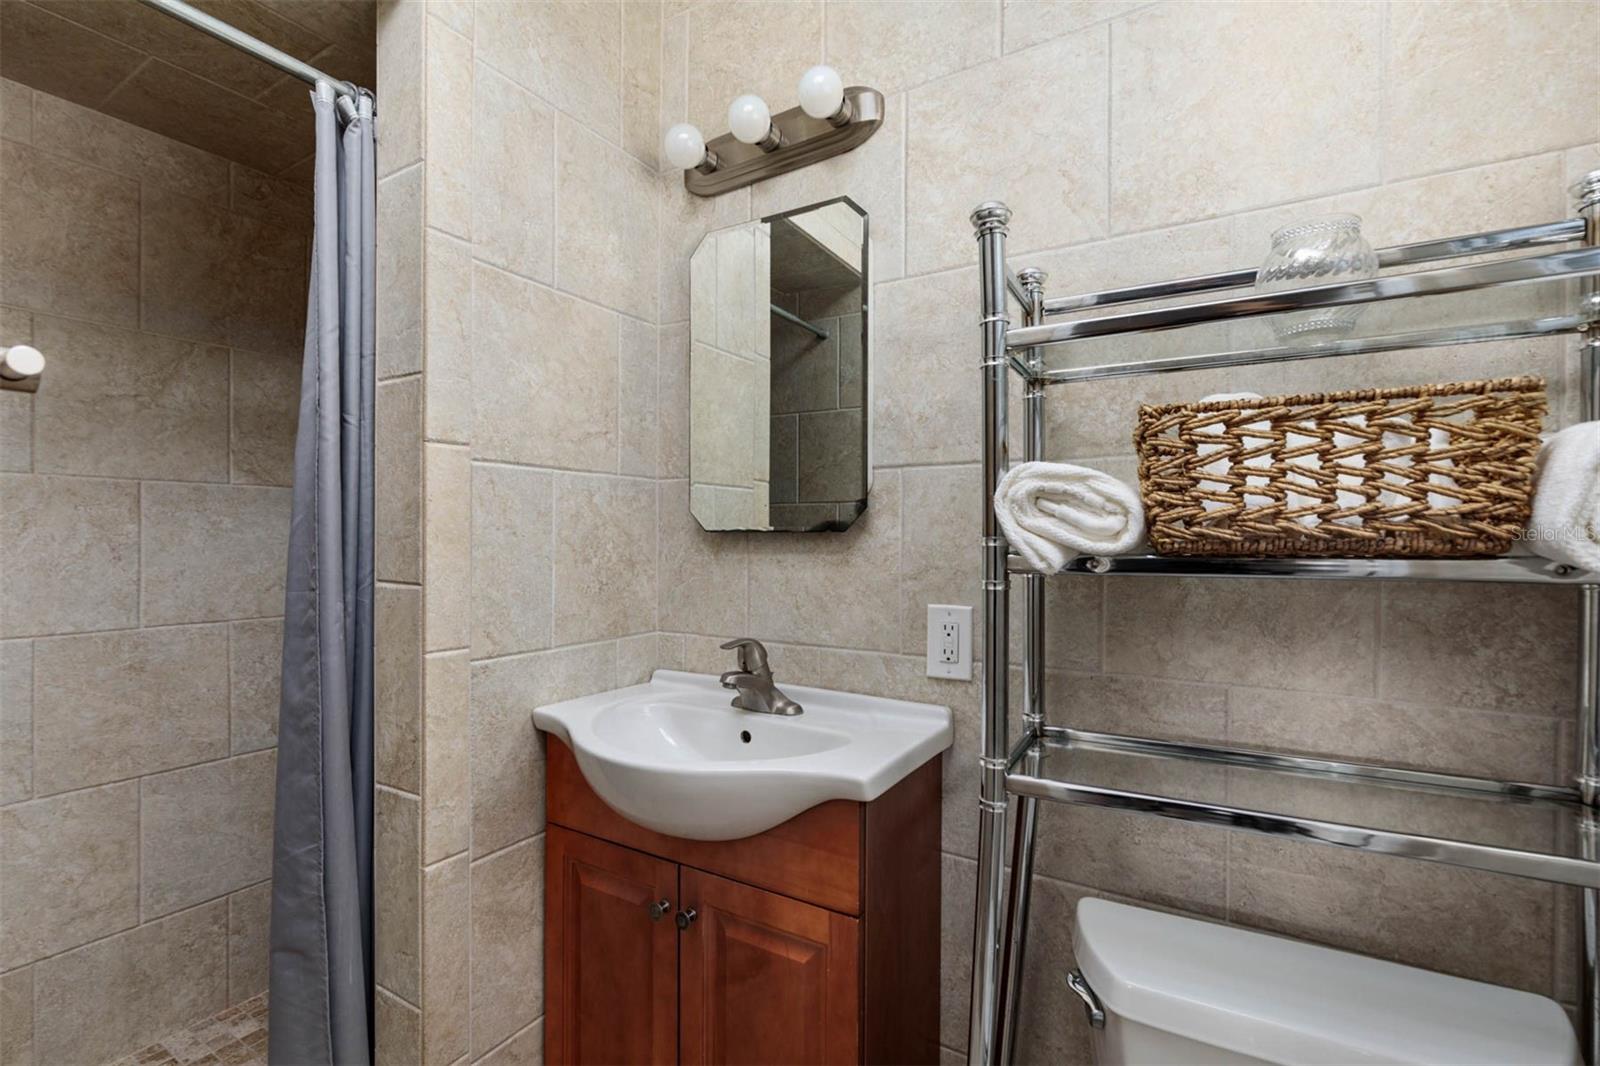 Primary suite bathroom with shower